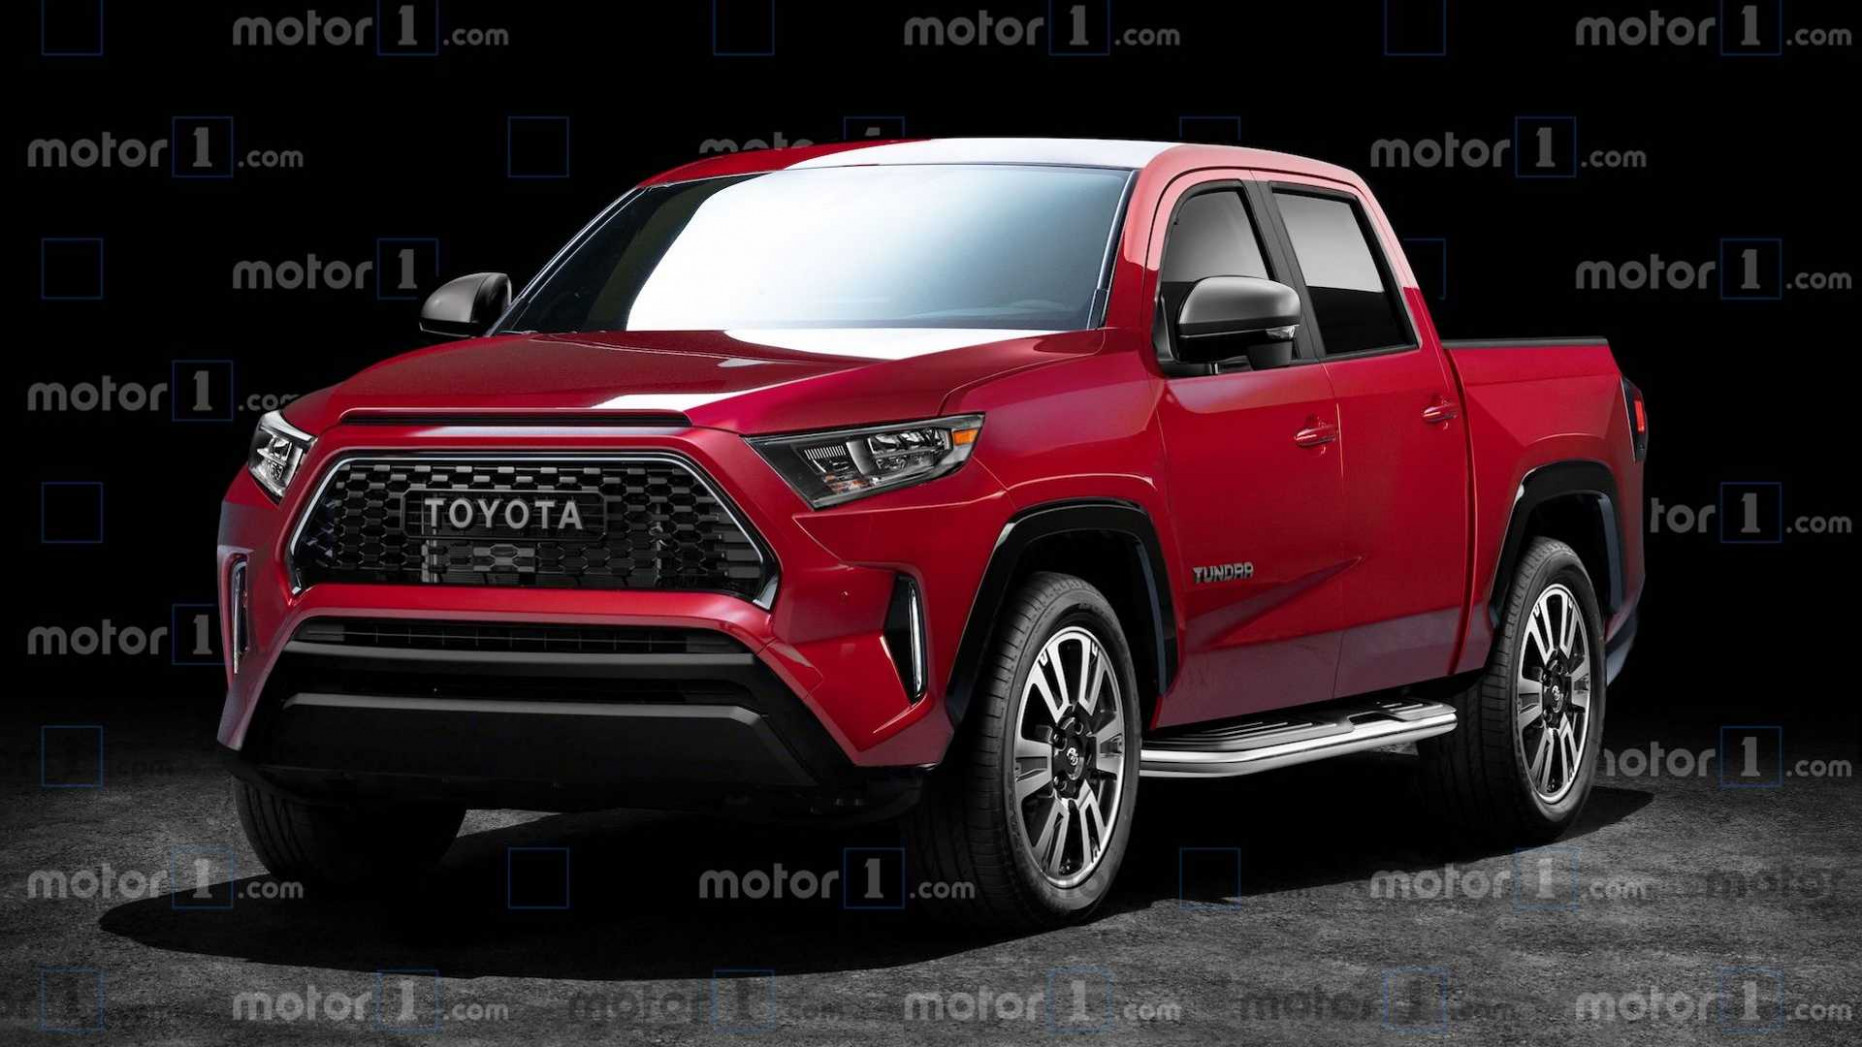 Release 2022 Toyota Tacoma Diesel Trd Pro